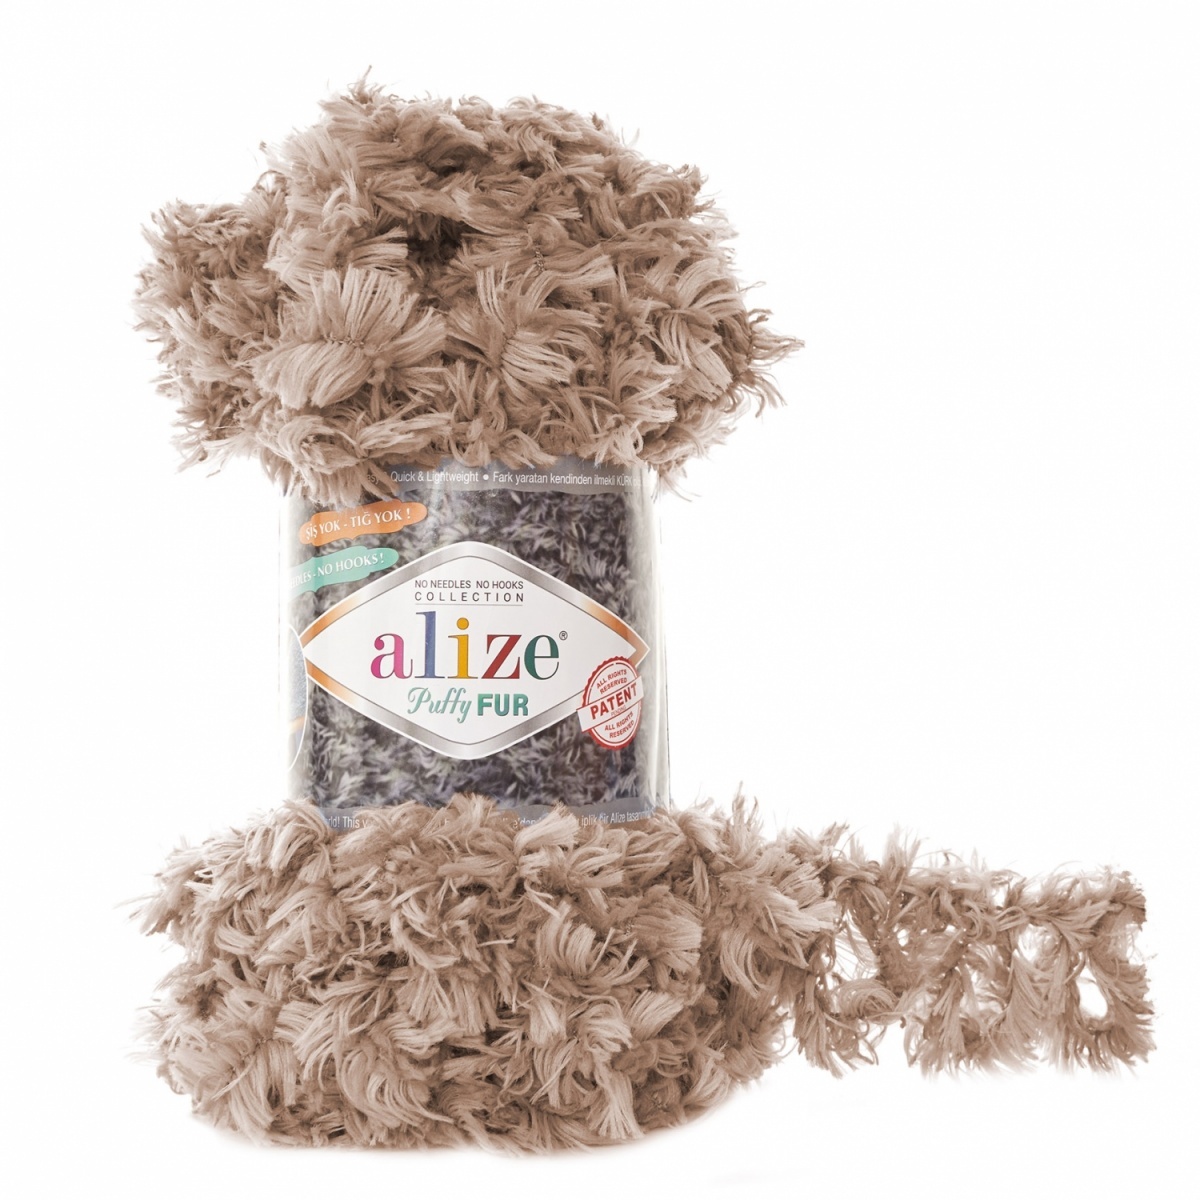 Alize Puffy Fur, 100% Polyester 5 Skein Value Pack, 500g фото 5